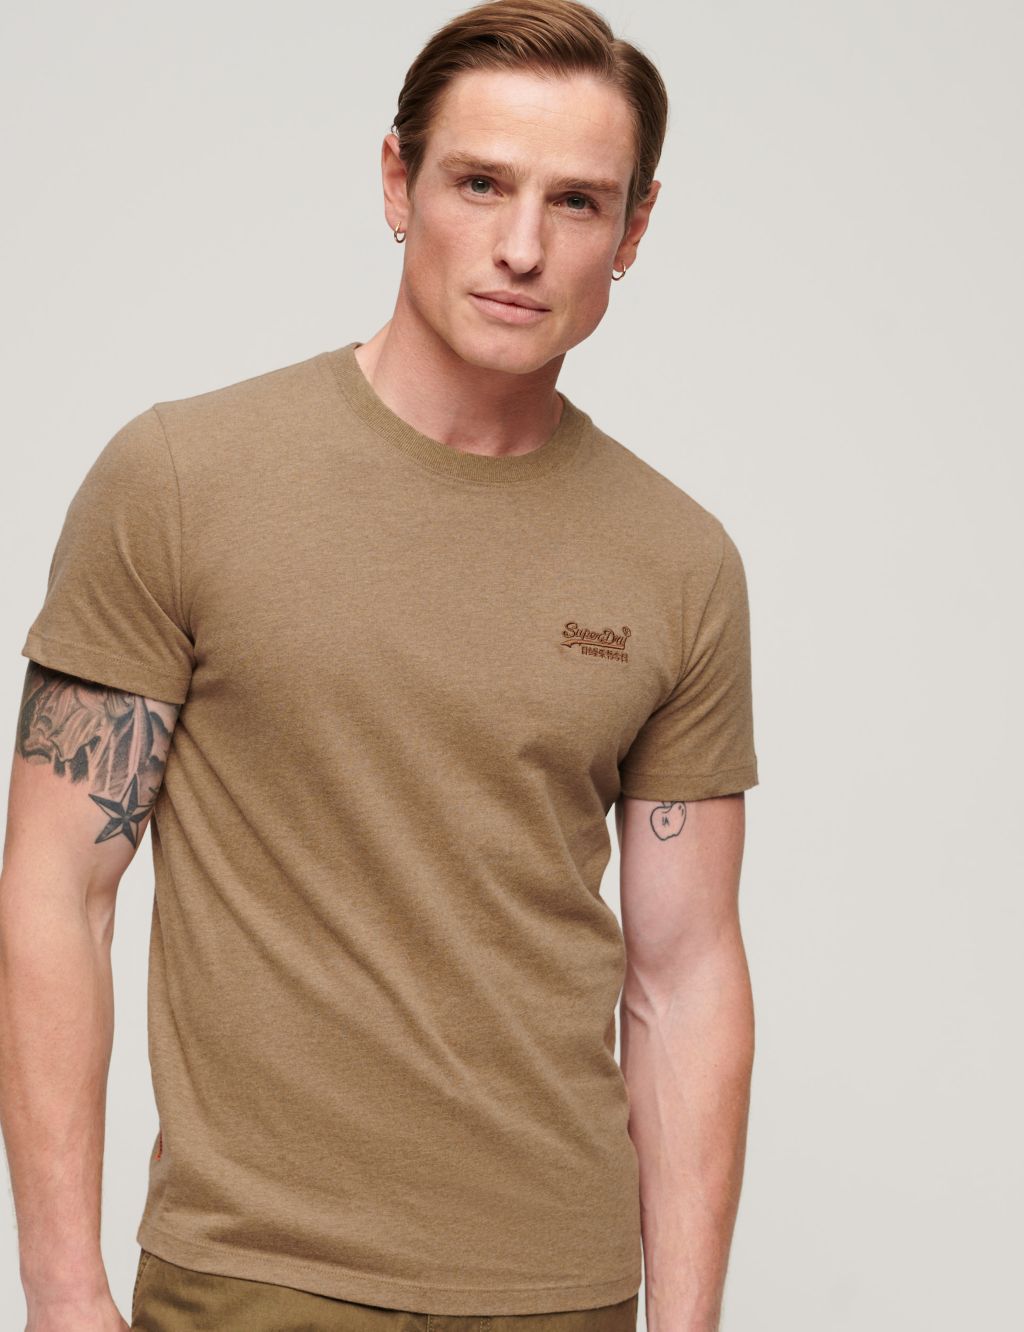 Relaxed Fit Organic Cotton Textured T-Shirt image 1